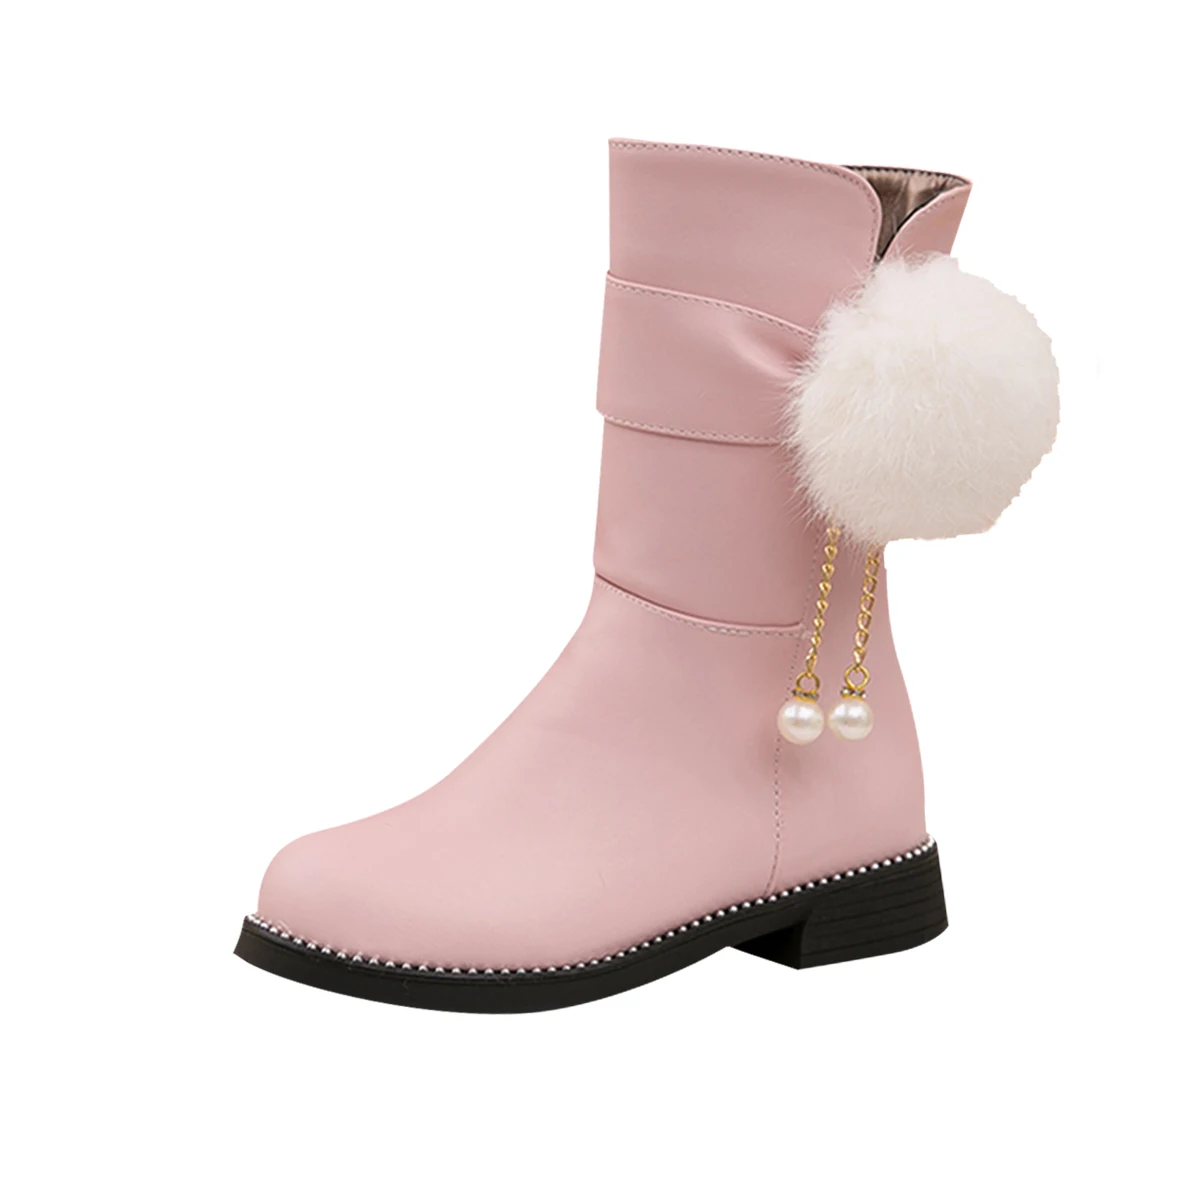 

Winter Snowfield Lovely Pink Pom-poms Boots Children's Mid-Calf Boots for Girls, Black/white/pink